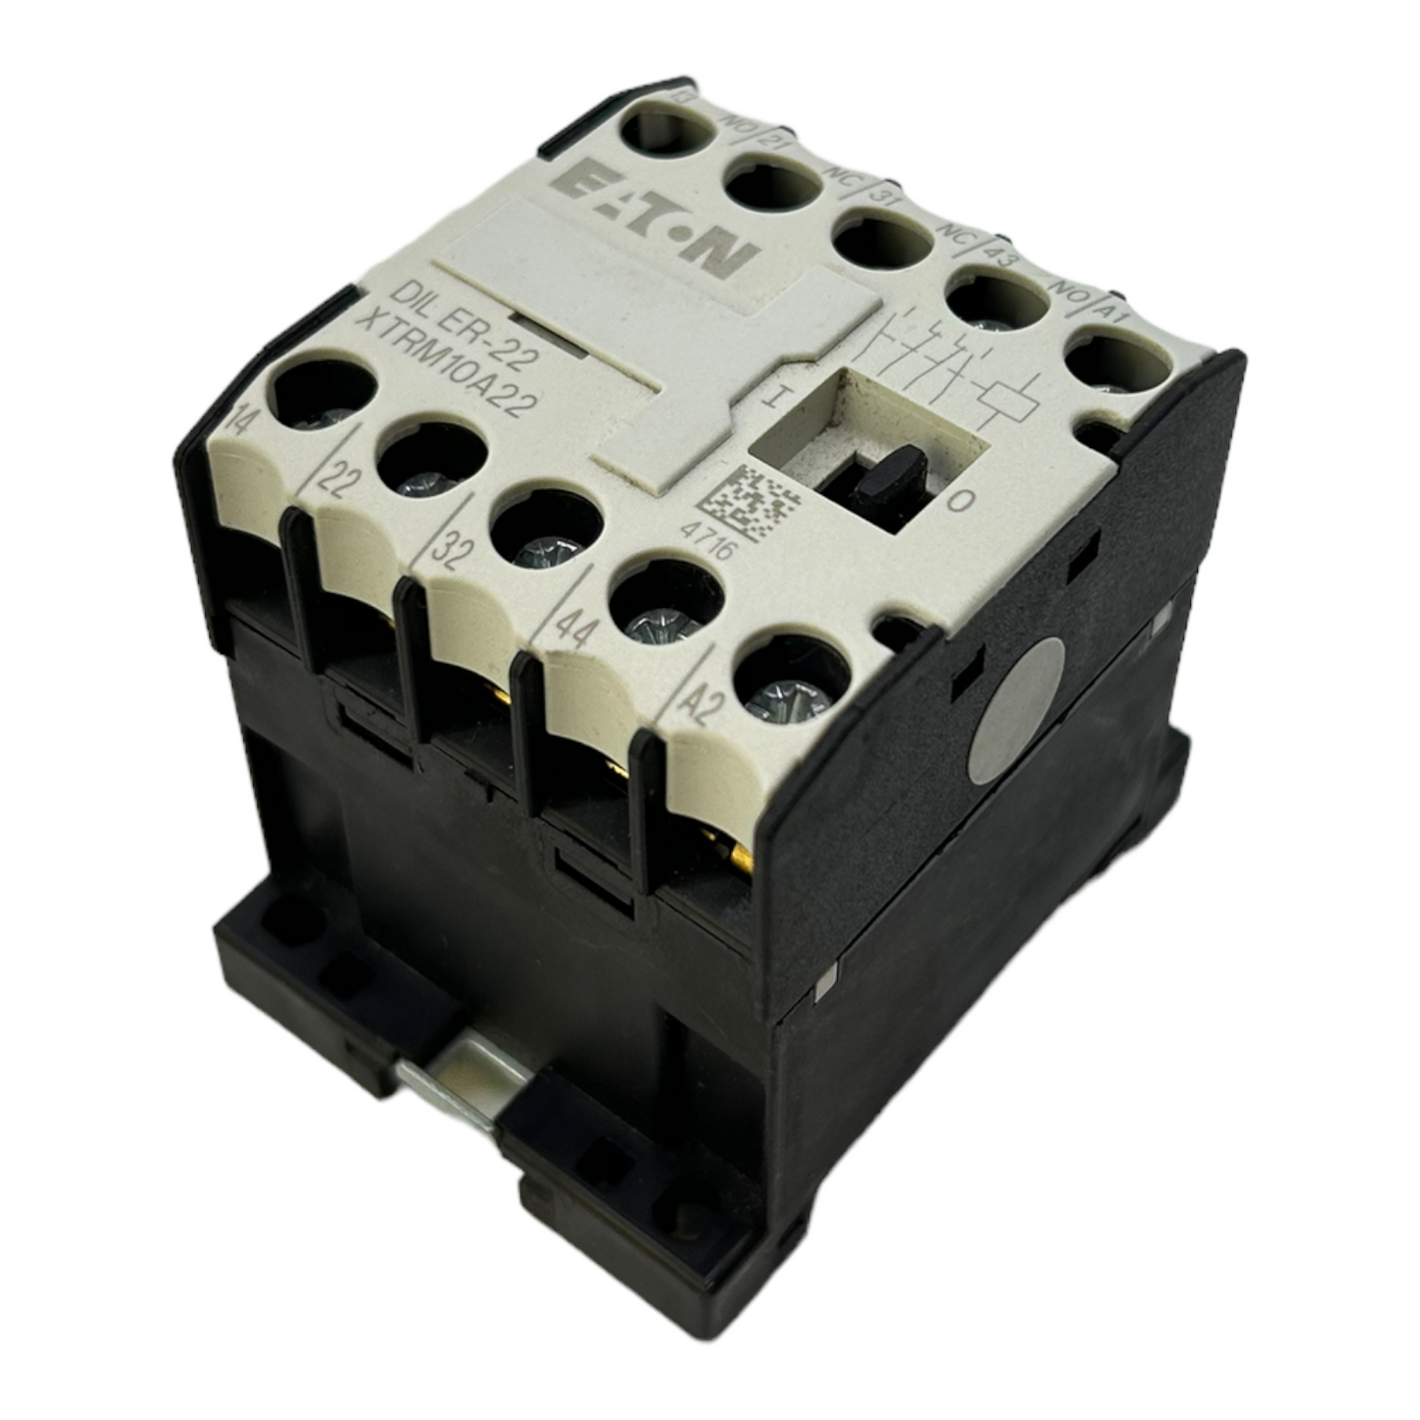 Eaton DILER-22 auxiliary switch block for industrial use 230V 50Hz 240V 60Hz